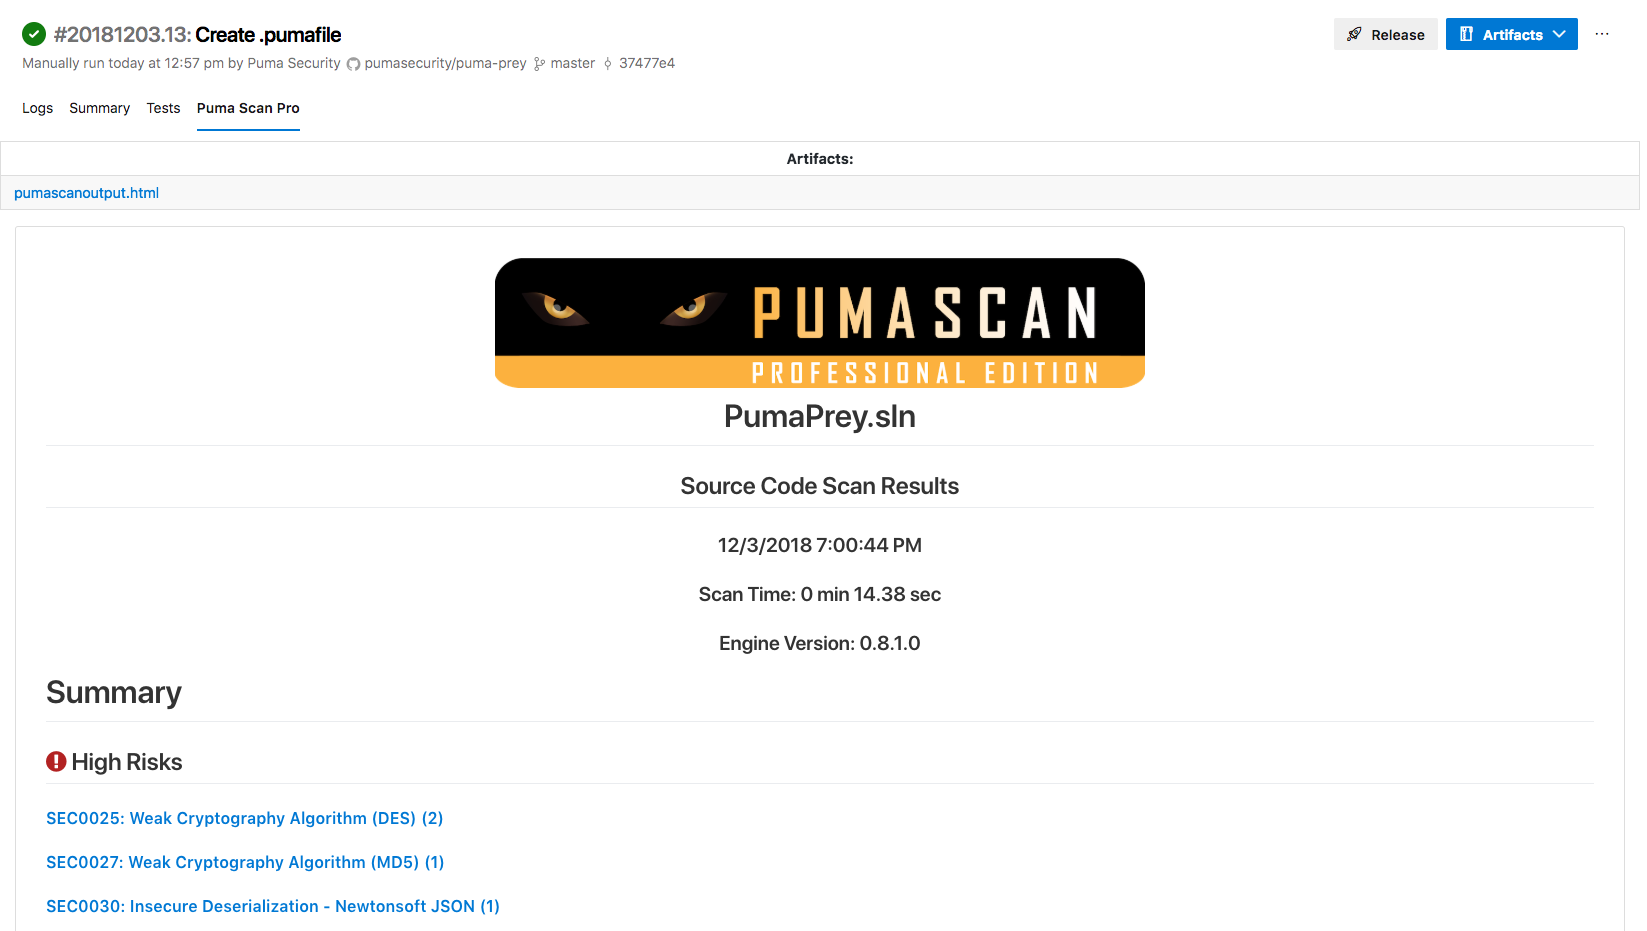 View the Puma Scan Results and Build Artifacts